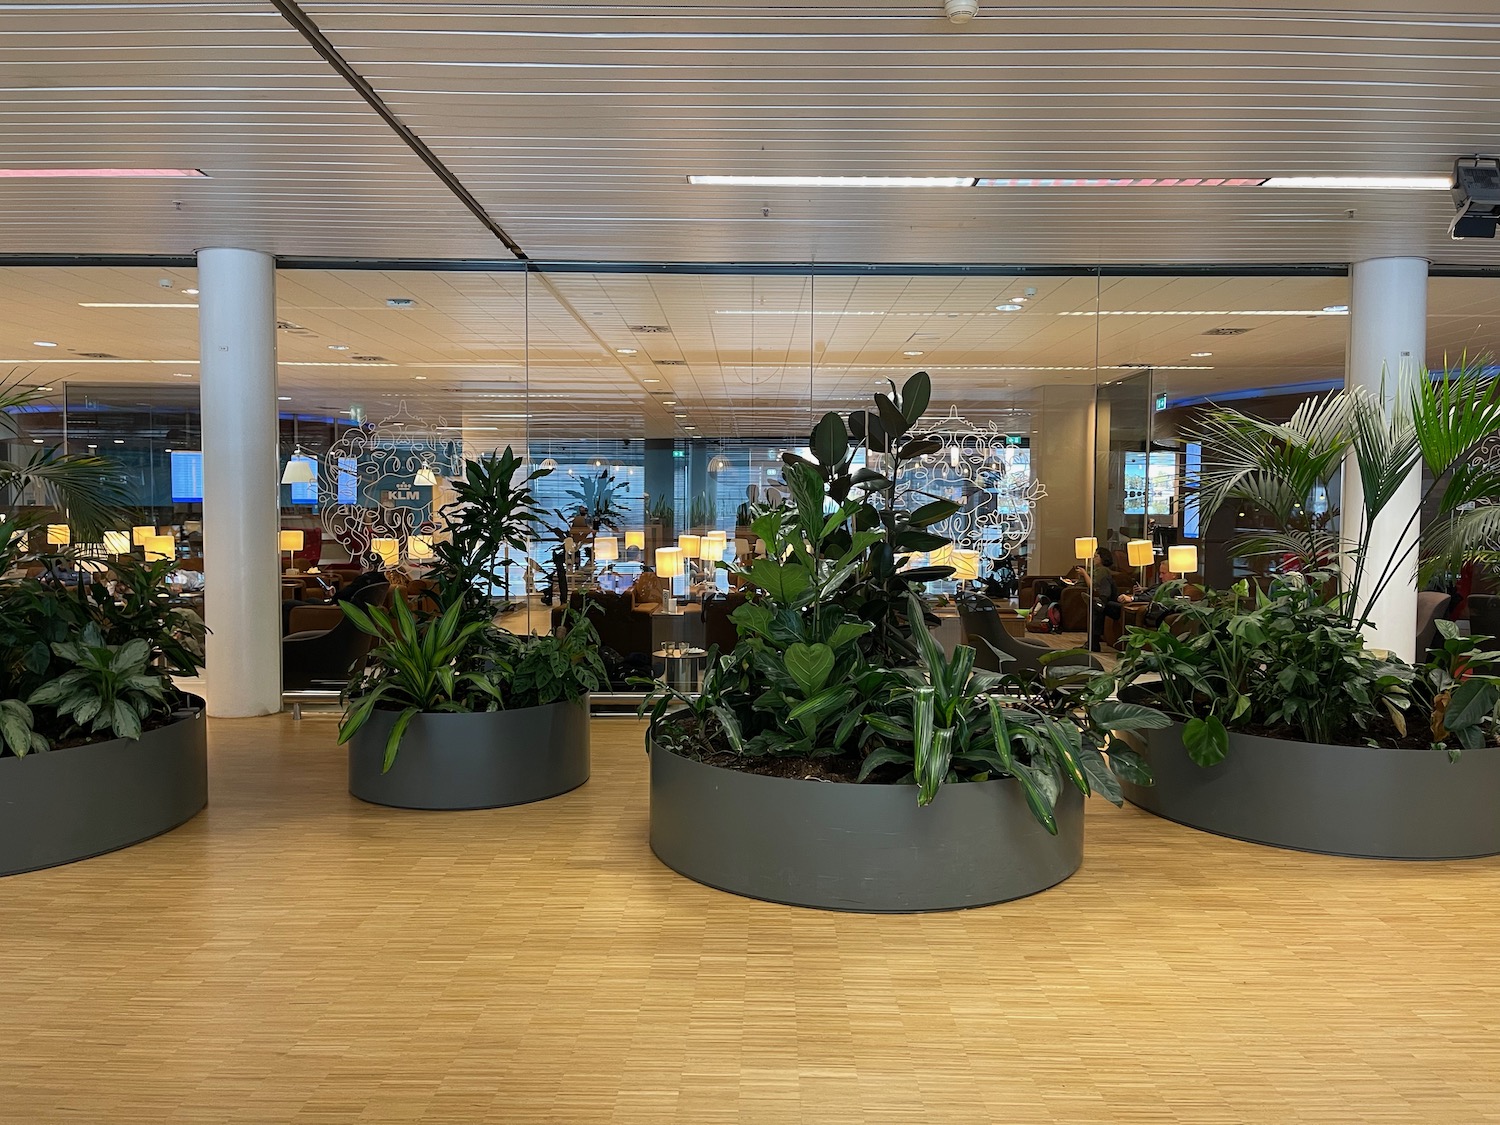 a planters in a room